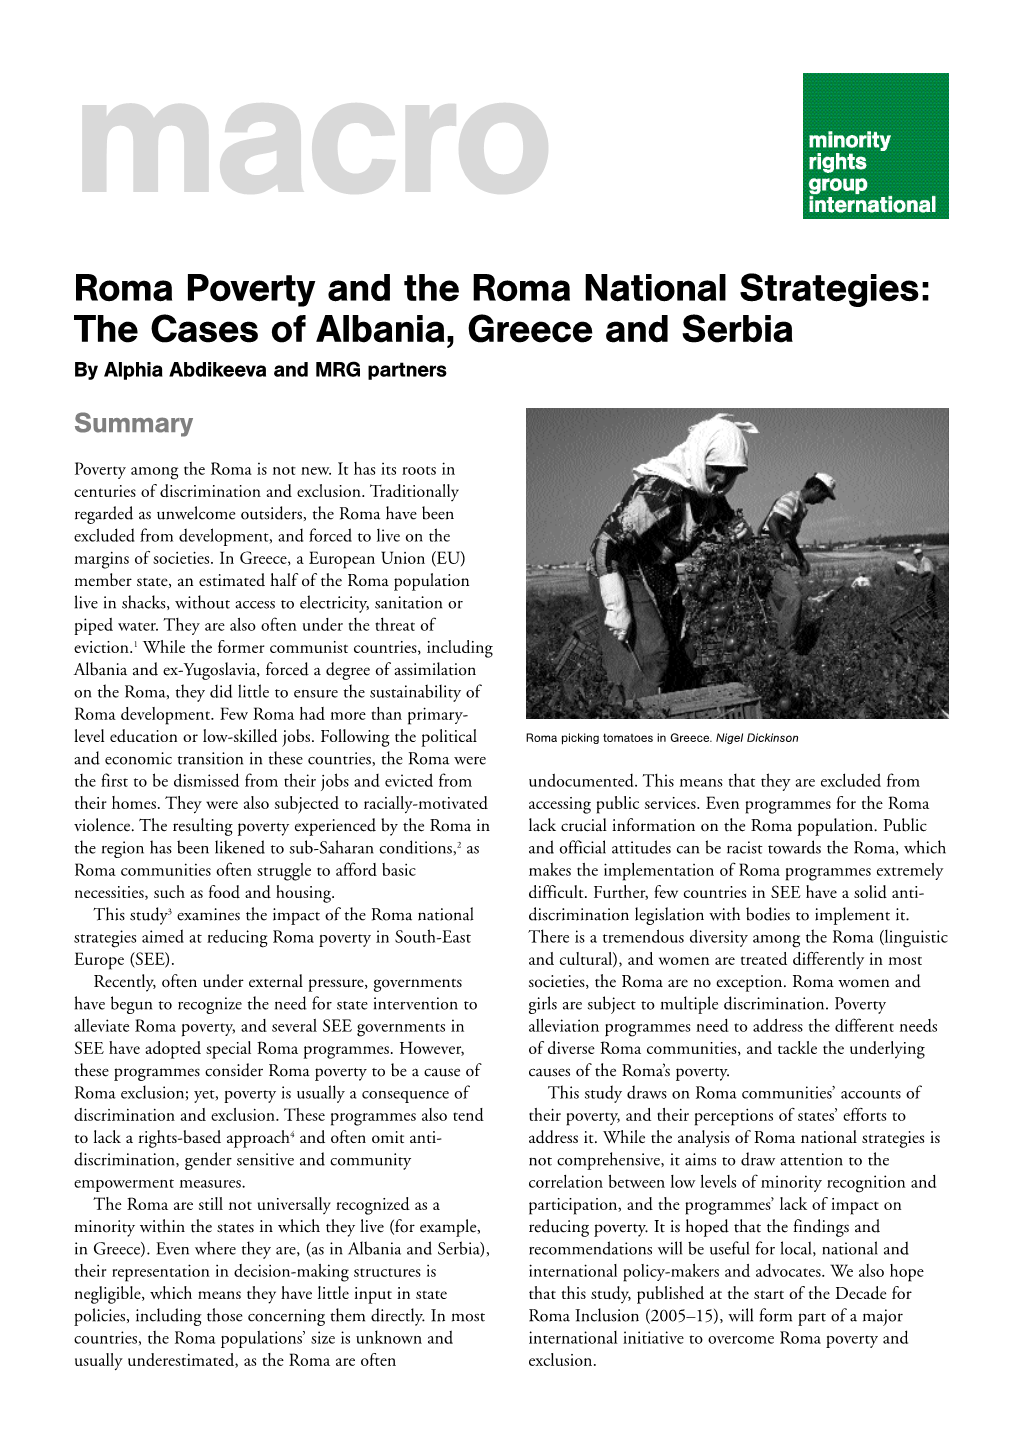 Roma Poverty and the Roma National Strategies: the Cases of Albania, Greece and Serbia by Alphia Abdikeeva and MRG Partners